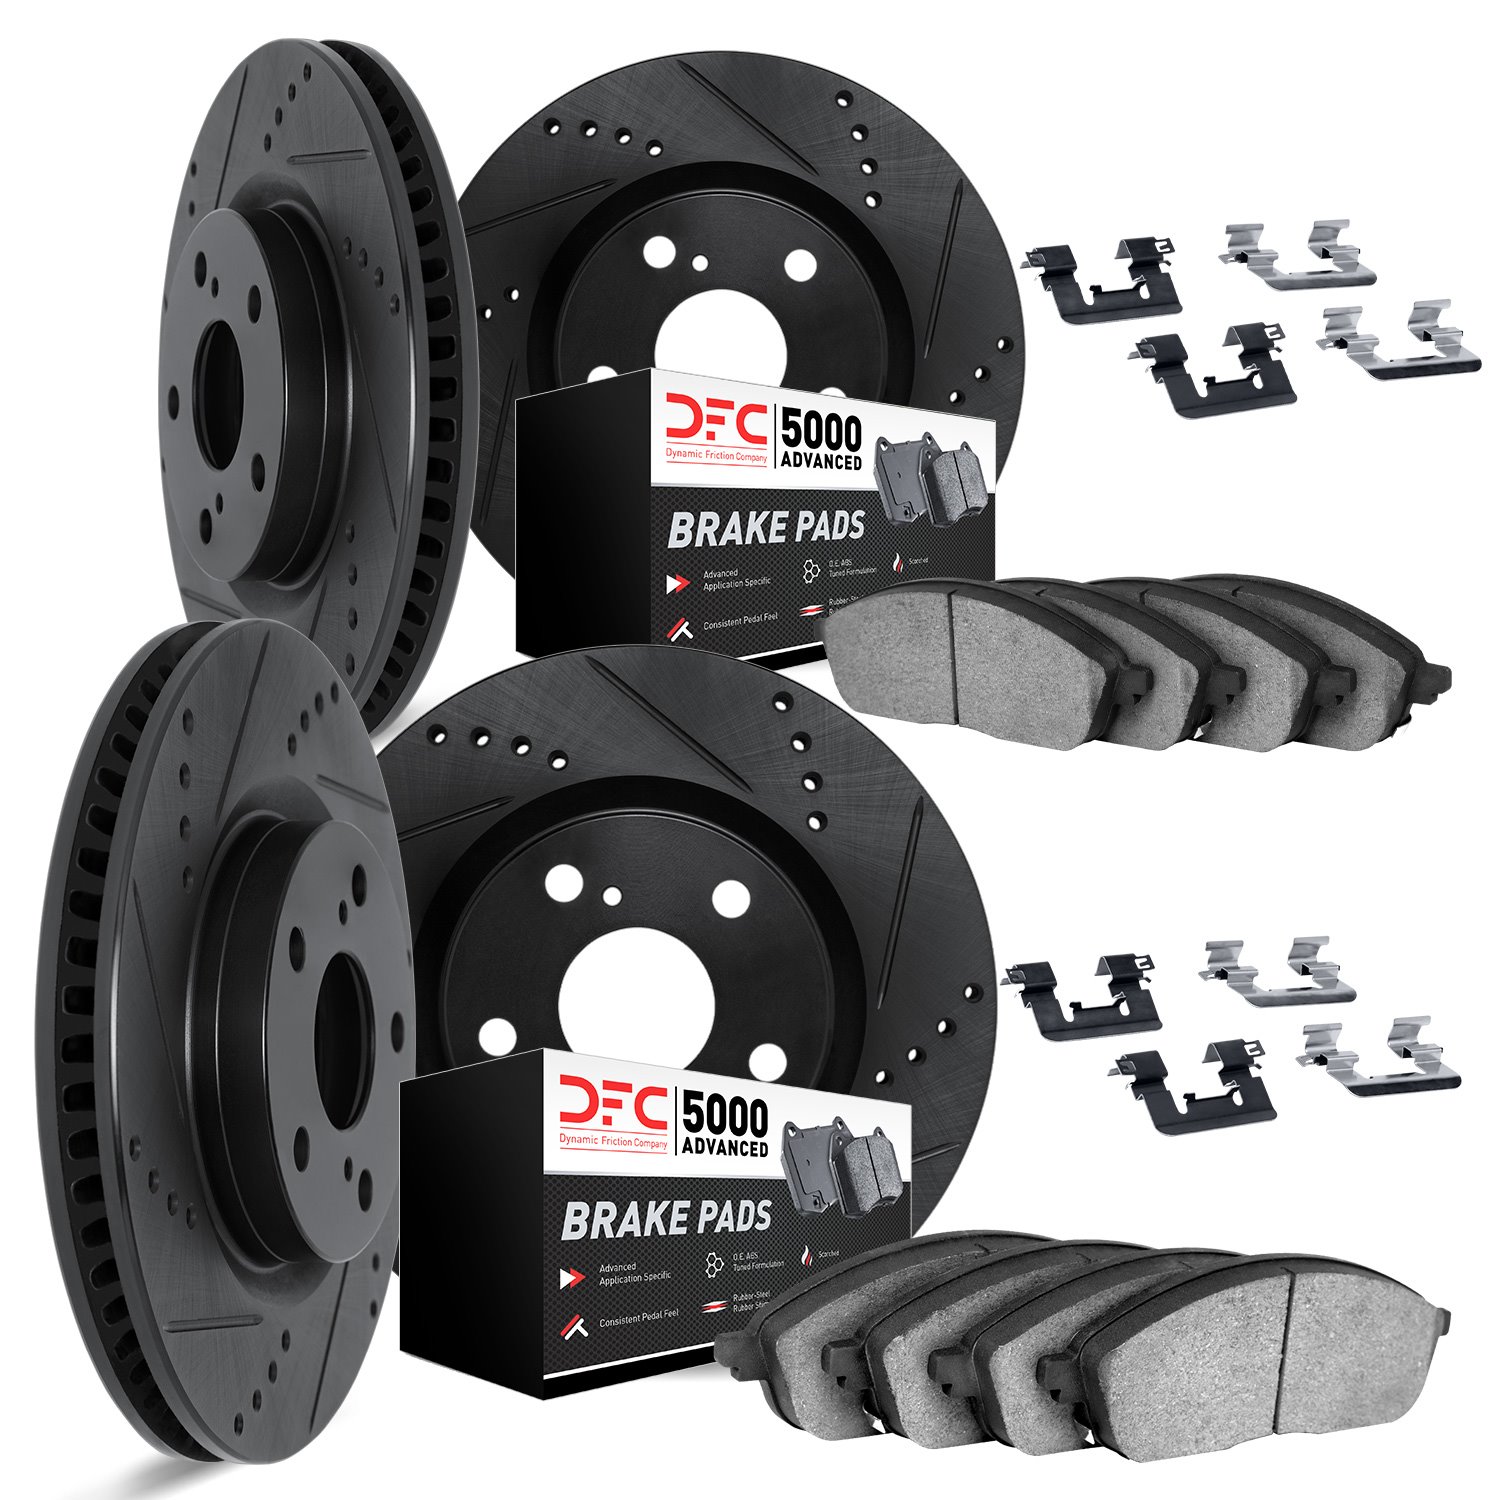 8514-31034 Drilled/Slotted Brake Rotors w/5000 Advanced Brake Pads Kit & Hardware [Black], 2009-2010 BMW, Position: Front and Re